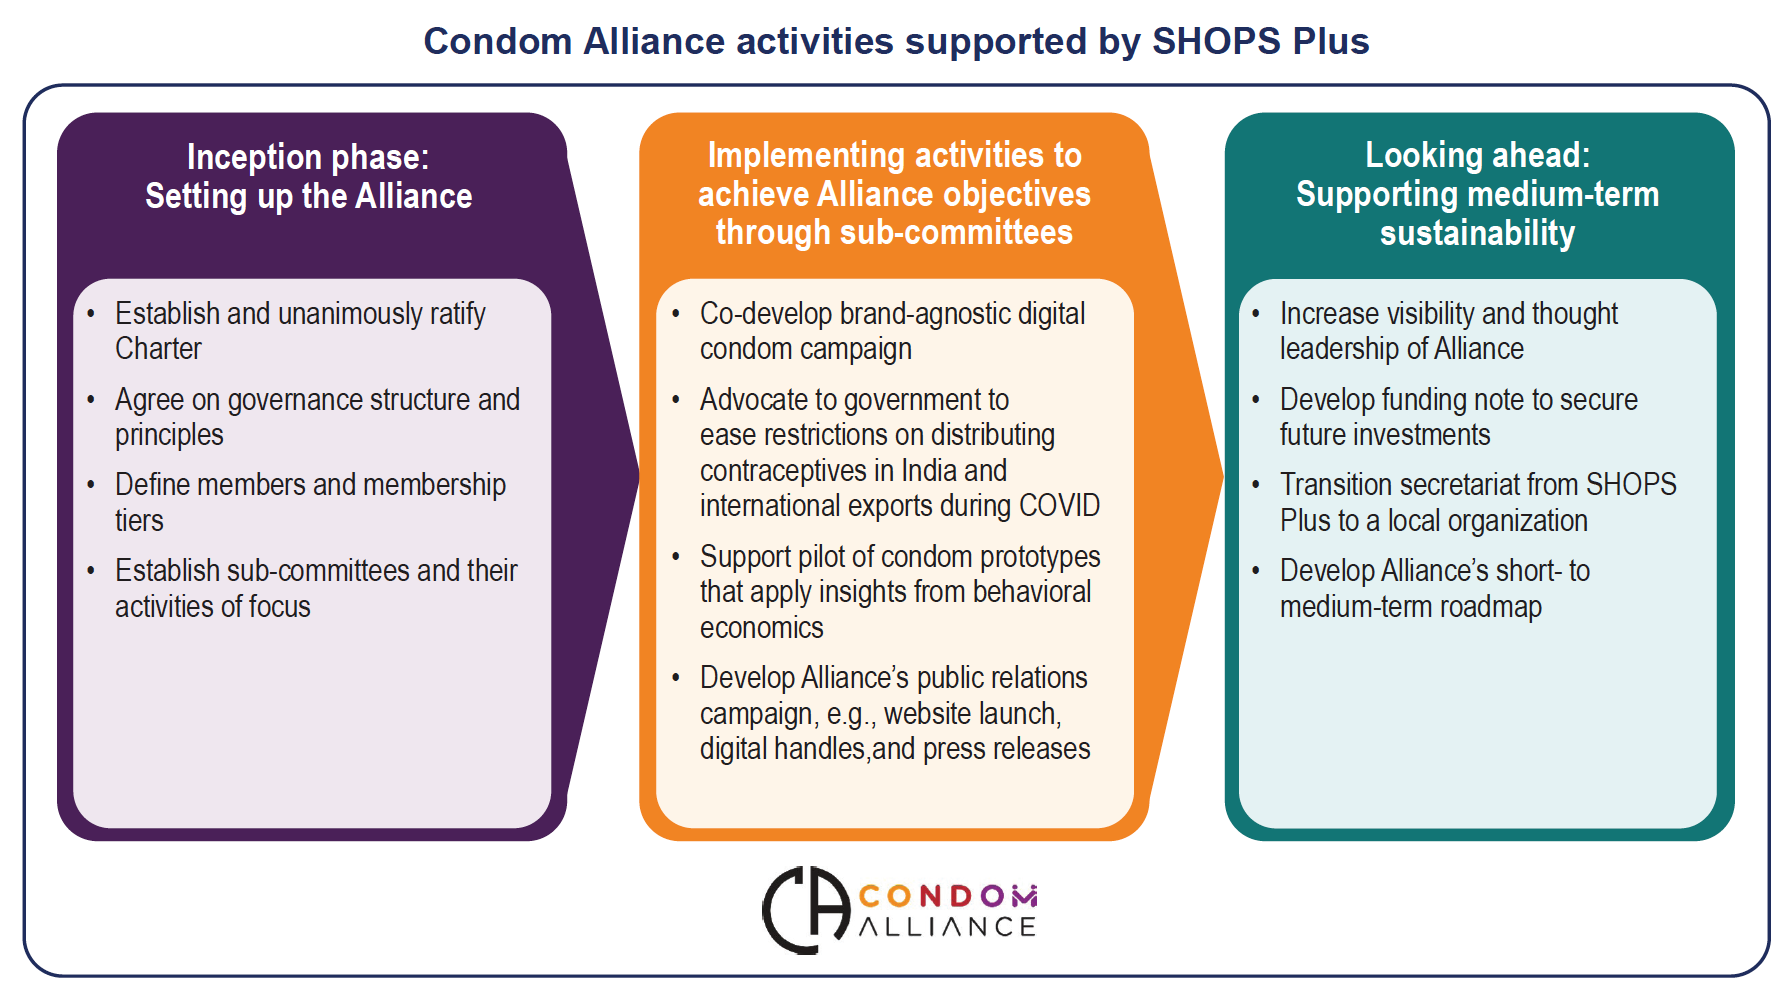 Condom Alliance activities supported by SHOPS Plus